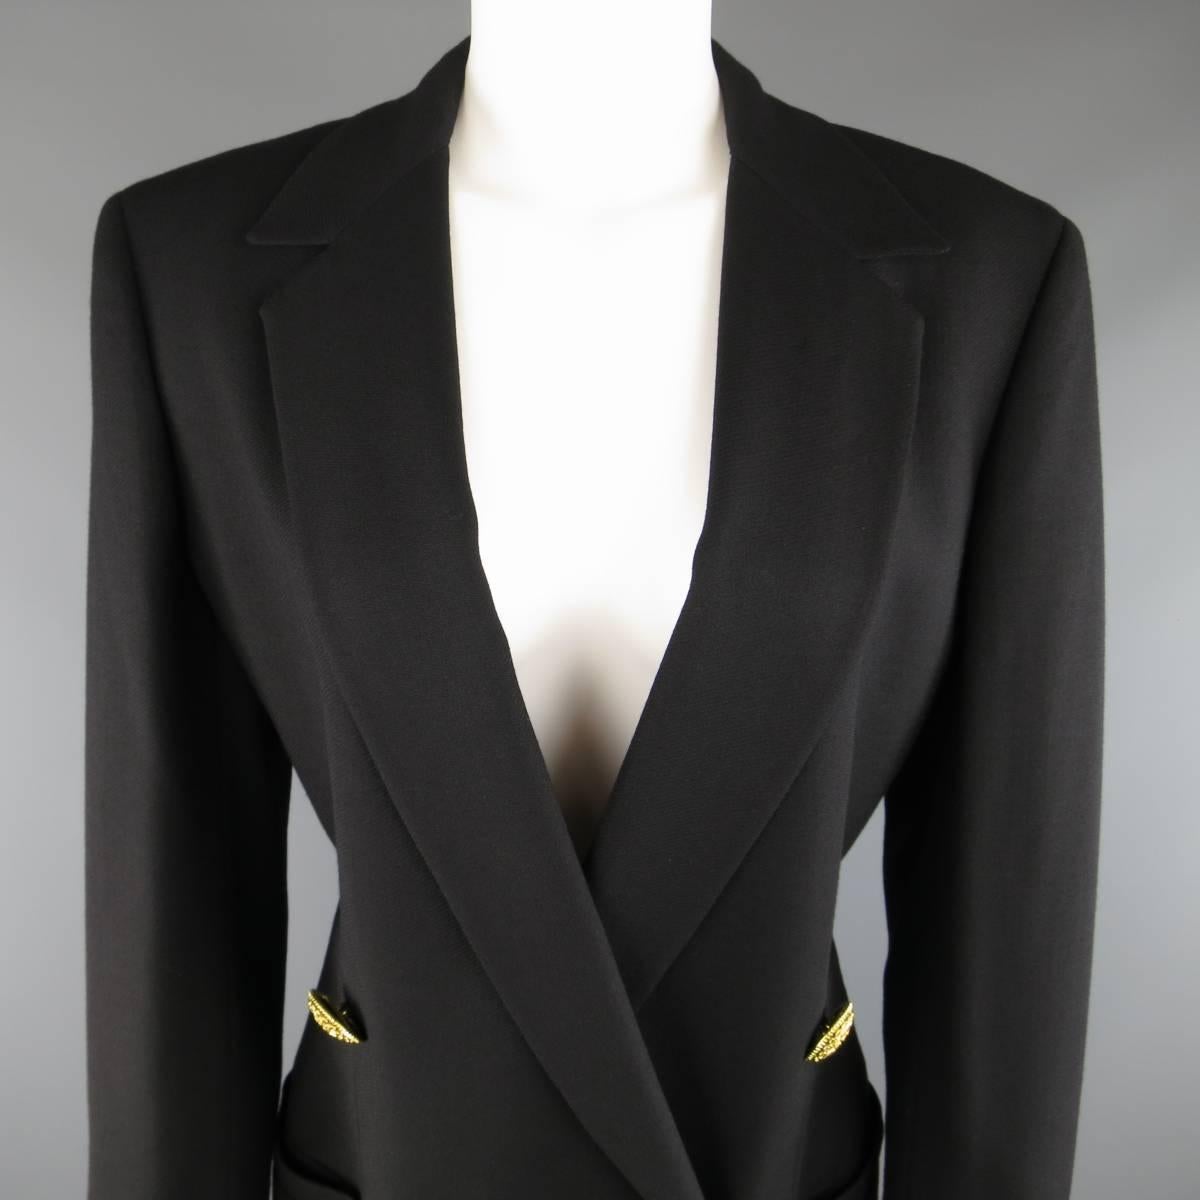 Vintage 1990's GIANNI VERSACE blazer comes in a black wool twill and features a pointed notch lapel, and double breasted closure with oversized, gold tone statement jewelry buttons. Care tags removed. Made in Italy.
 
Good Pre-Owned